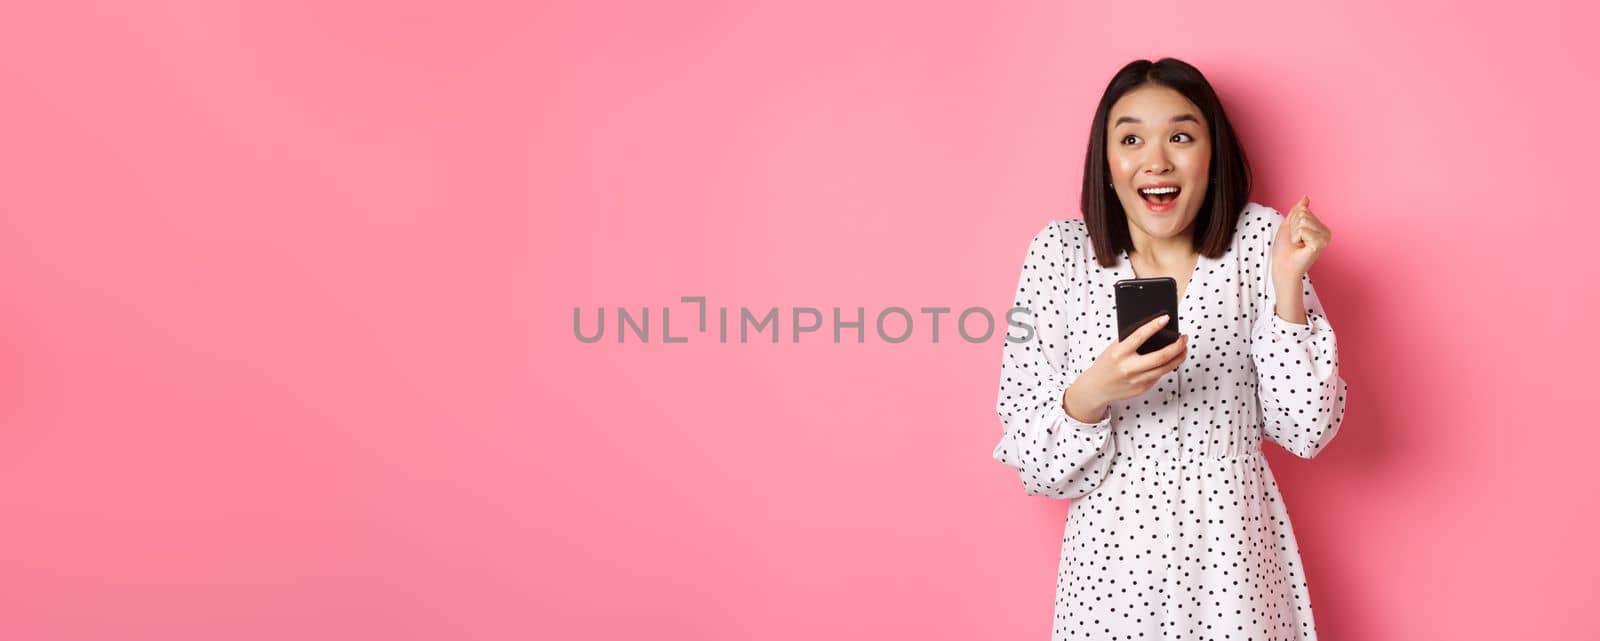 Online shopping and beauty concept. Excited asian woman winning in internet, holding smartphone and rejoicing, smiling happy and celebrating, standing over pink background.